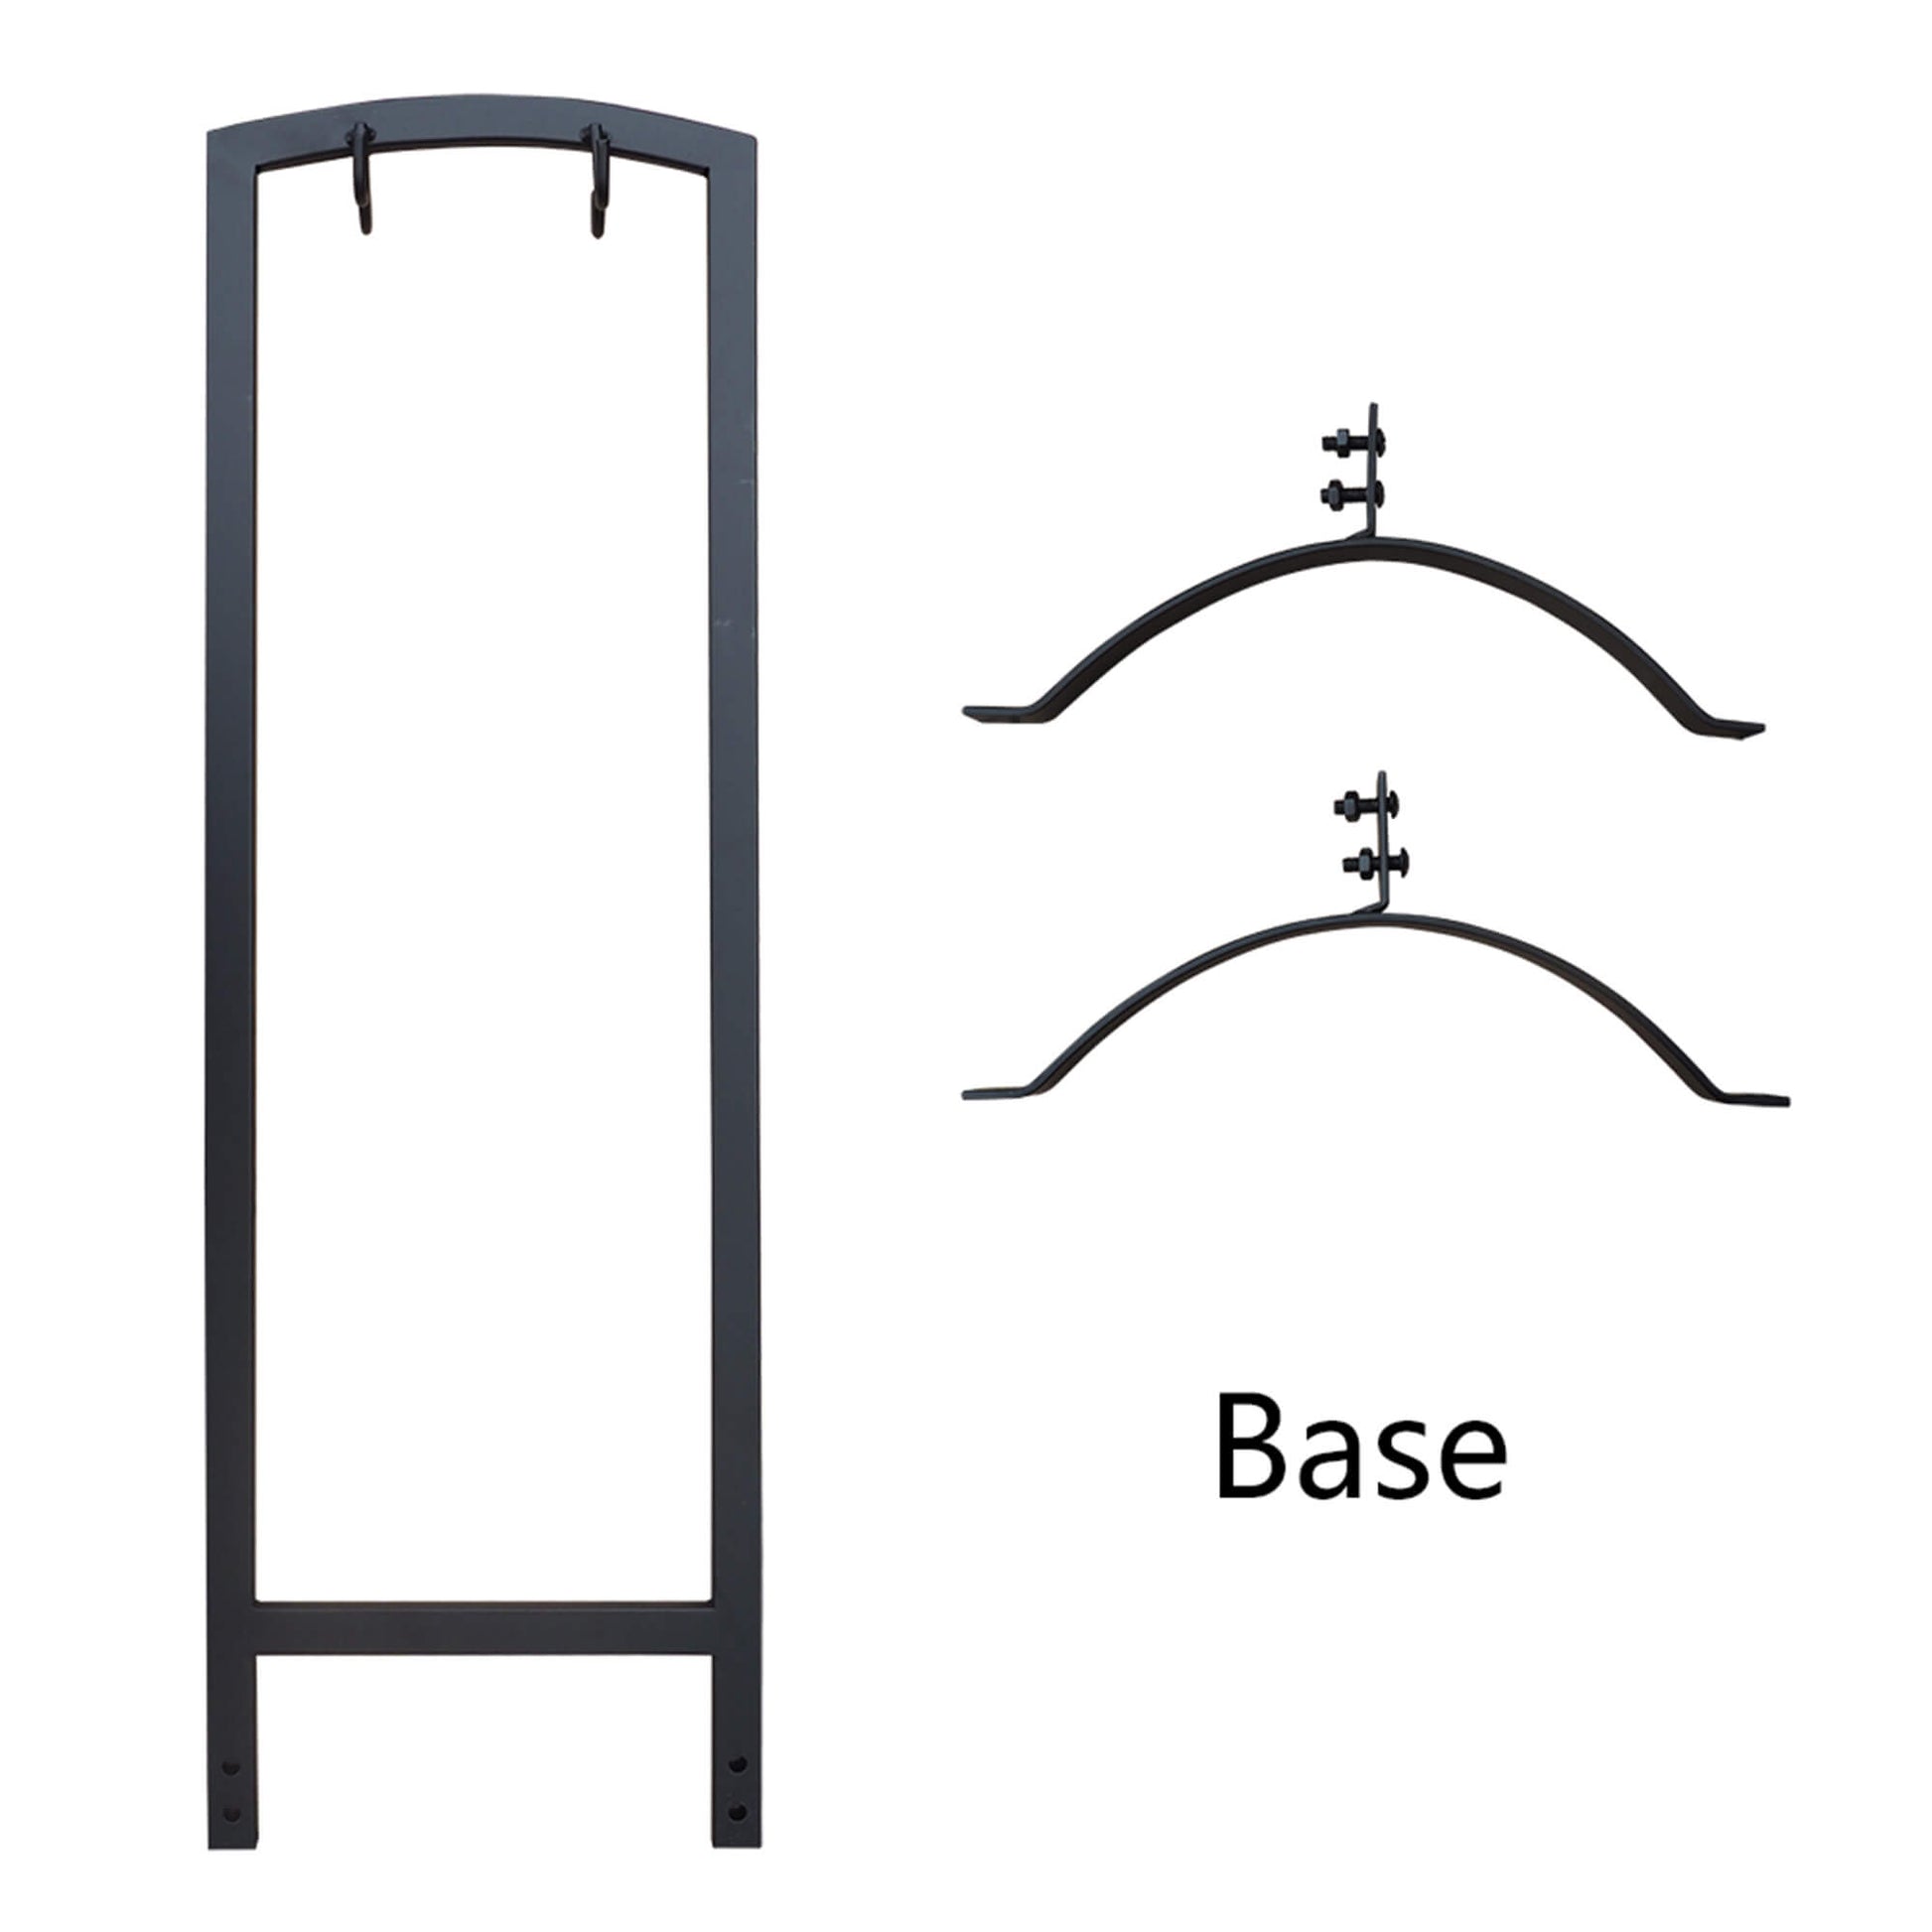 4pcs Fireplace Tools Sets / Wrought Iron Fire set / Fire Pit Stand Holder